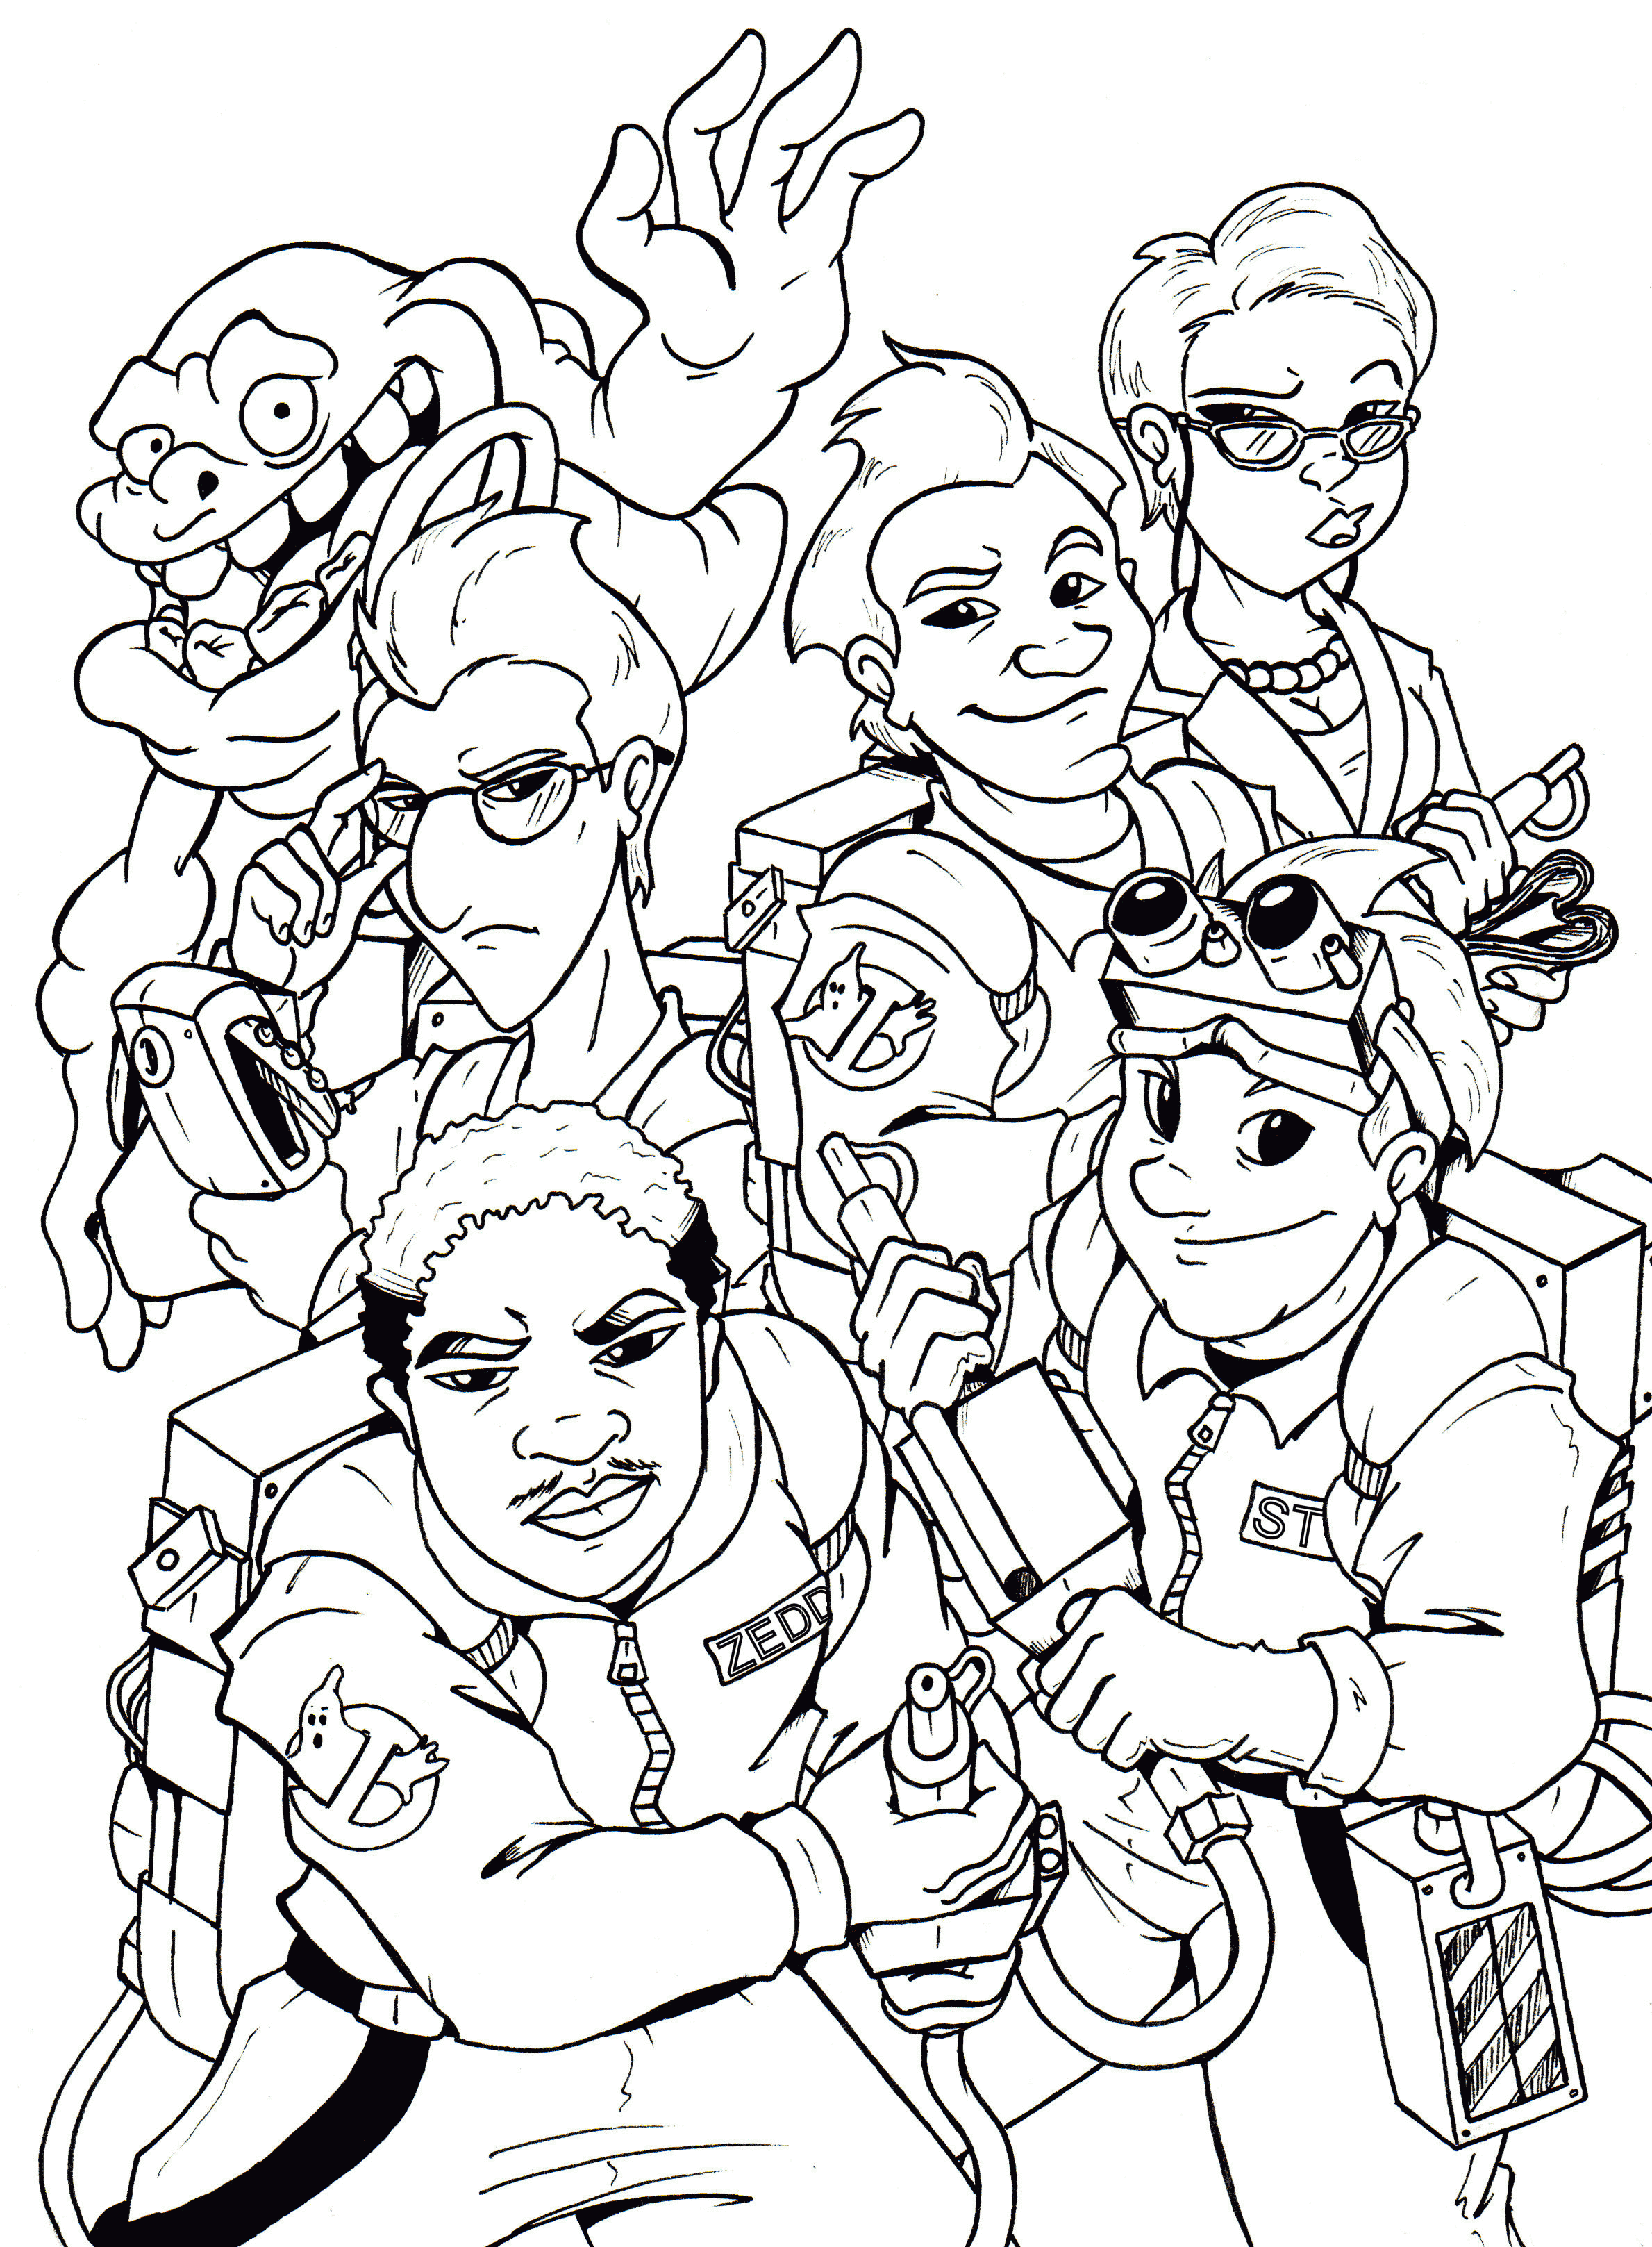 Printable Ghostbusters Coloring Pages Pdf - Ghostbusters Coloring Pages